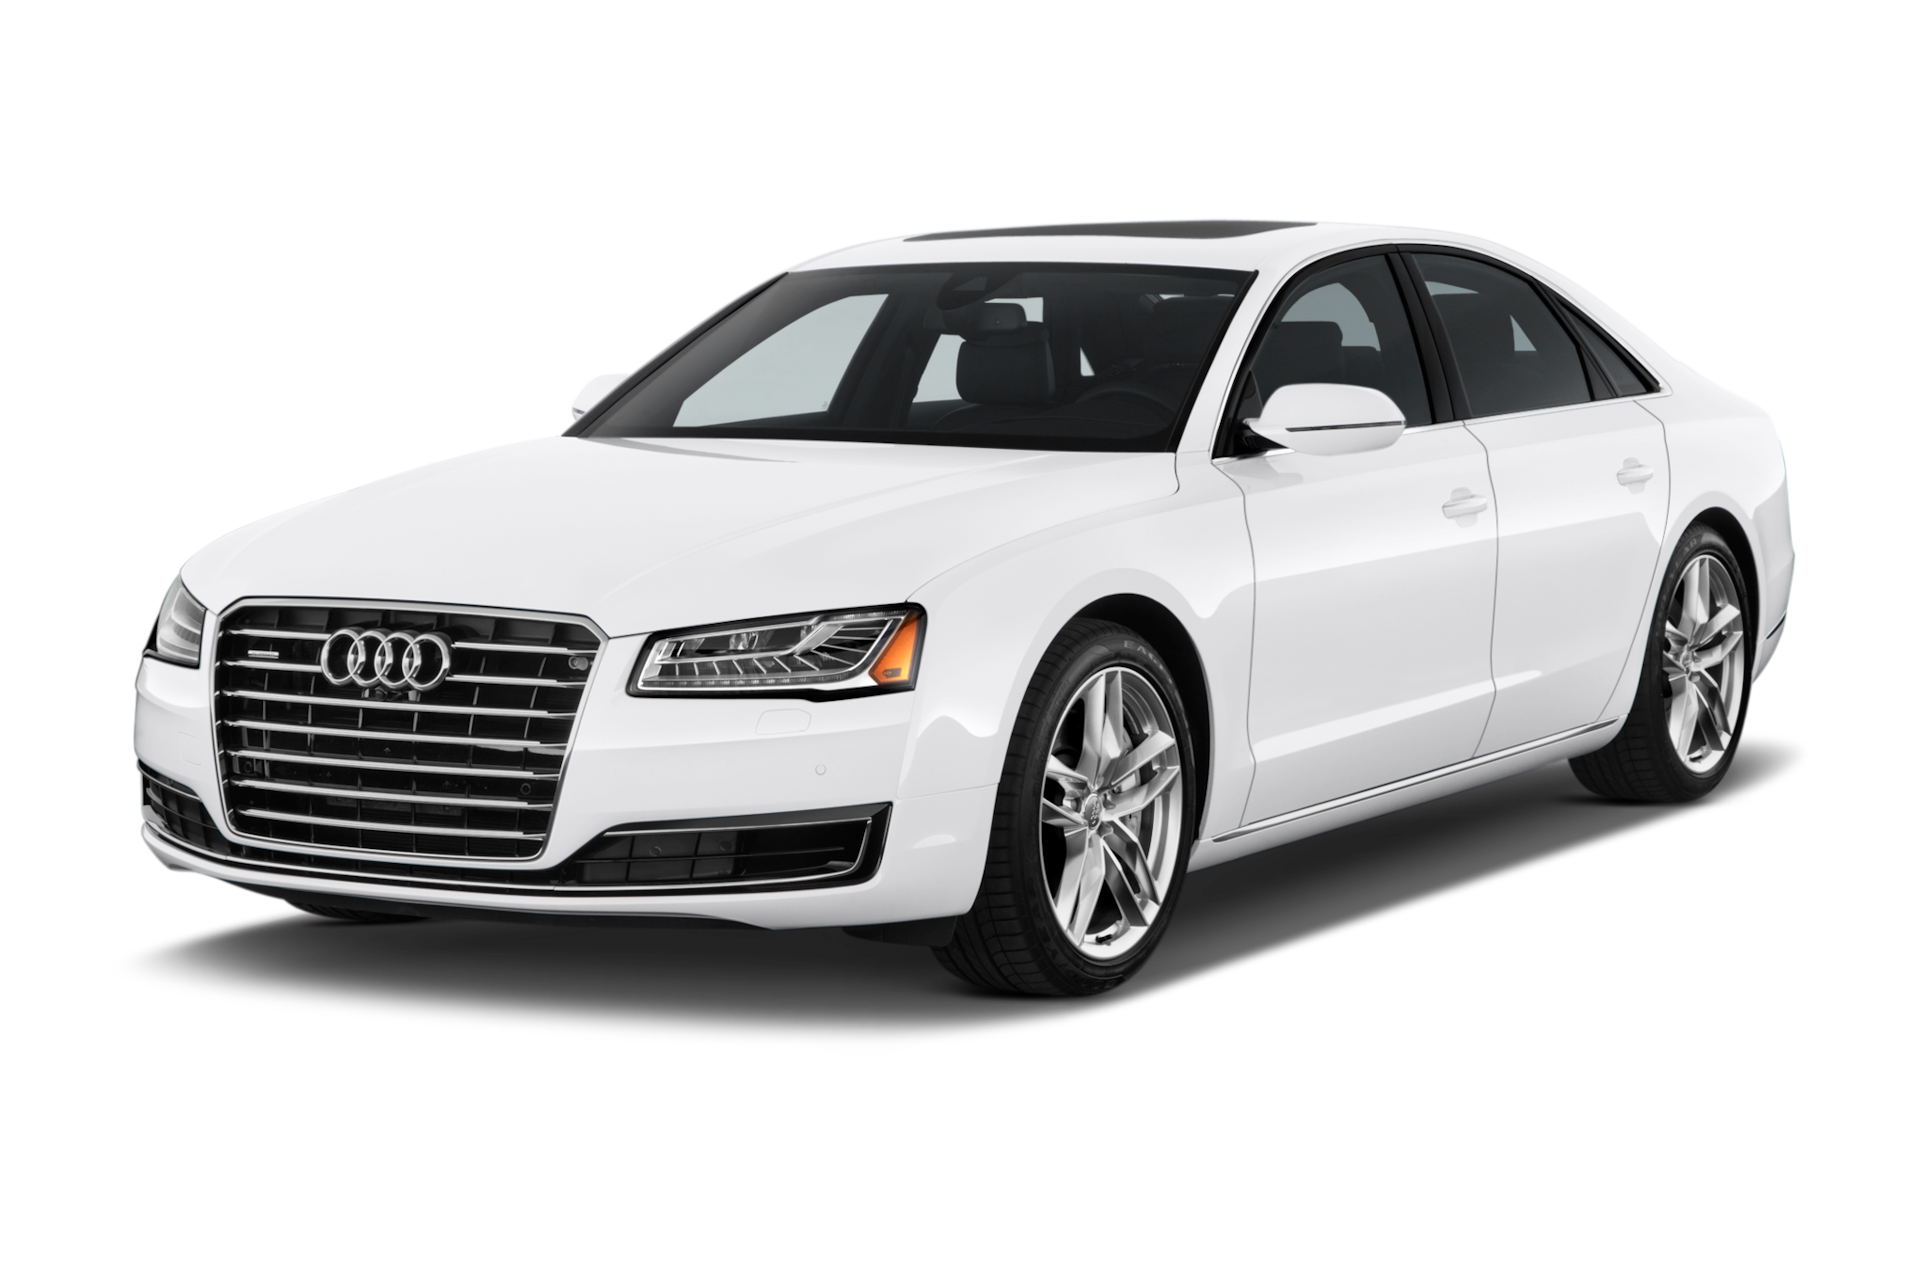 2015 Audi A8 Prices, Reviews, and Photos - MotorTrend